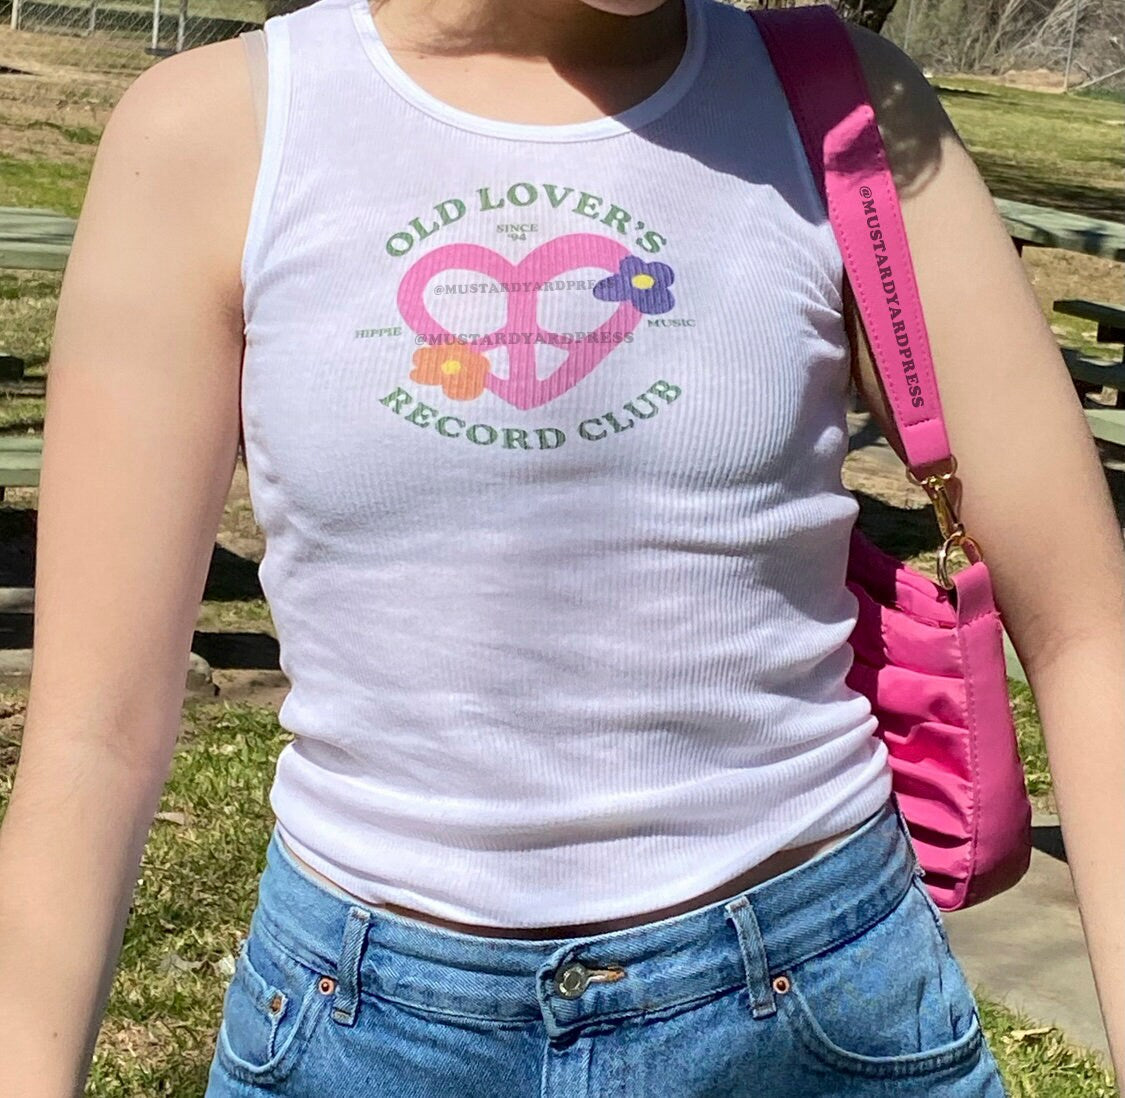 old lover's baby tank